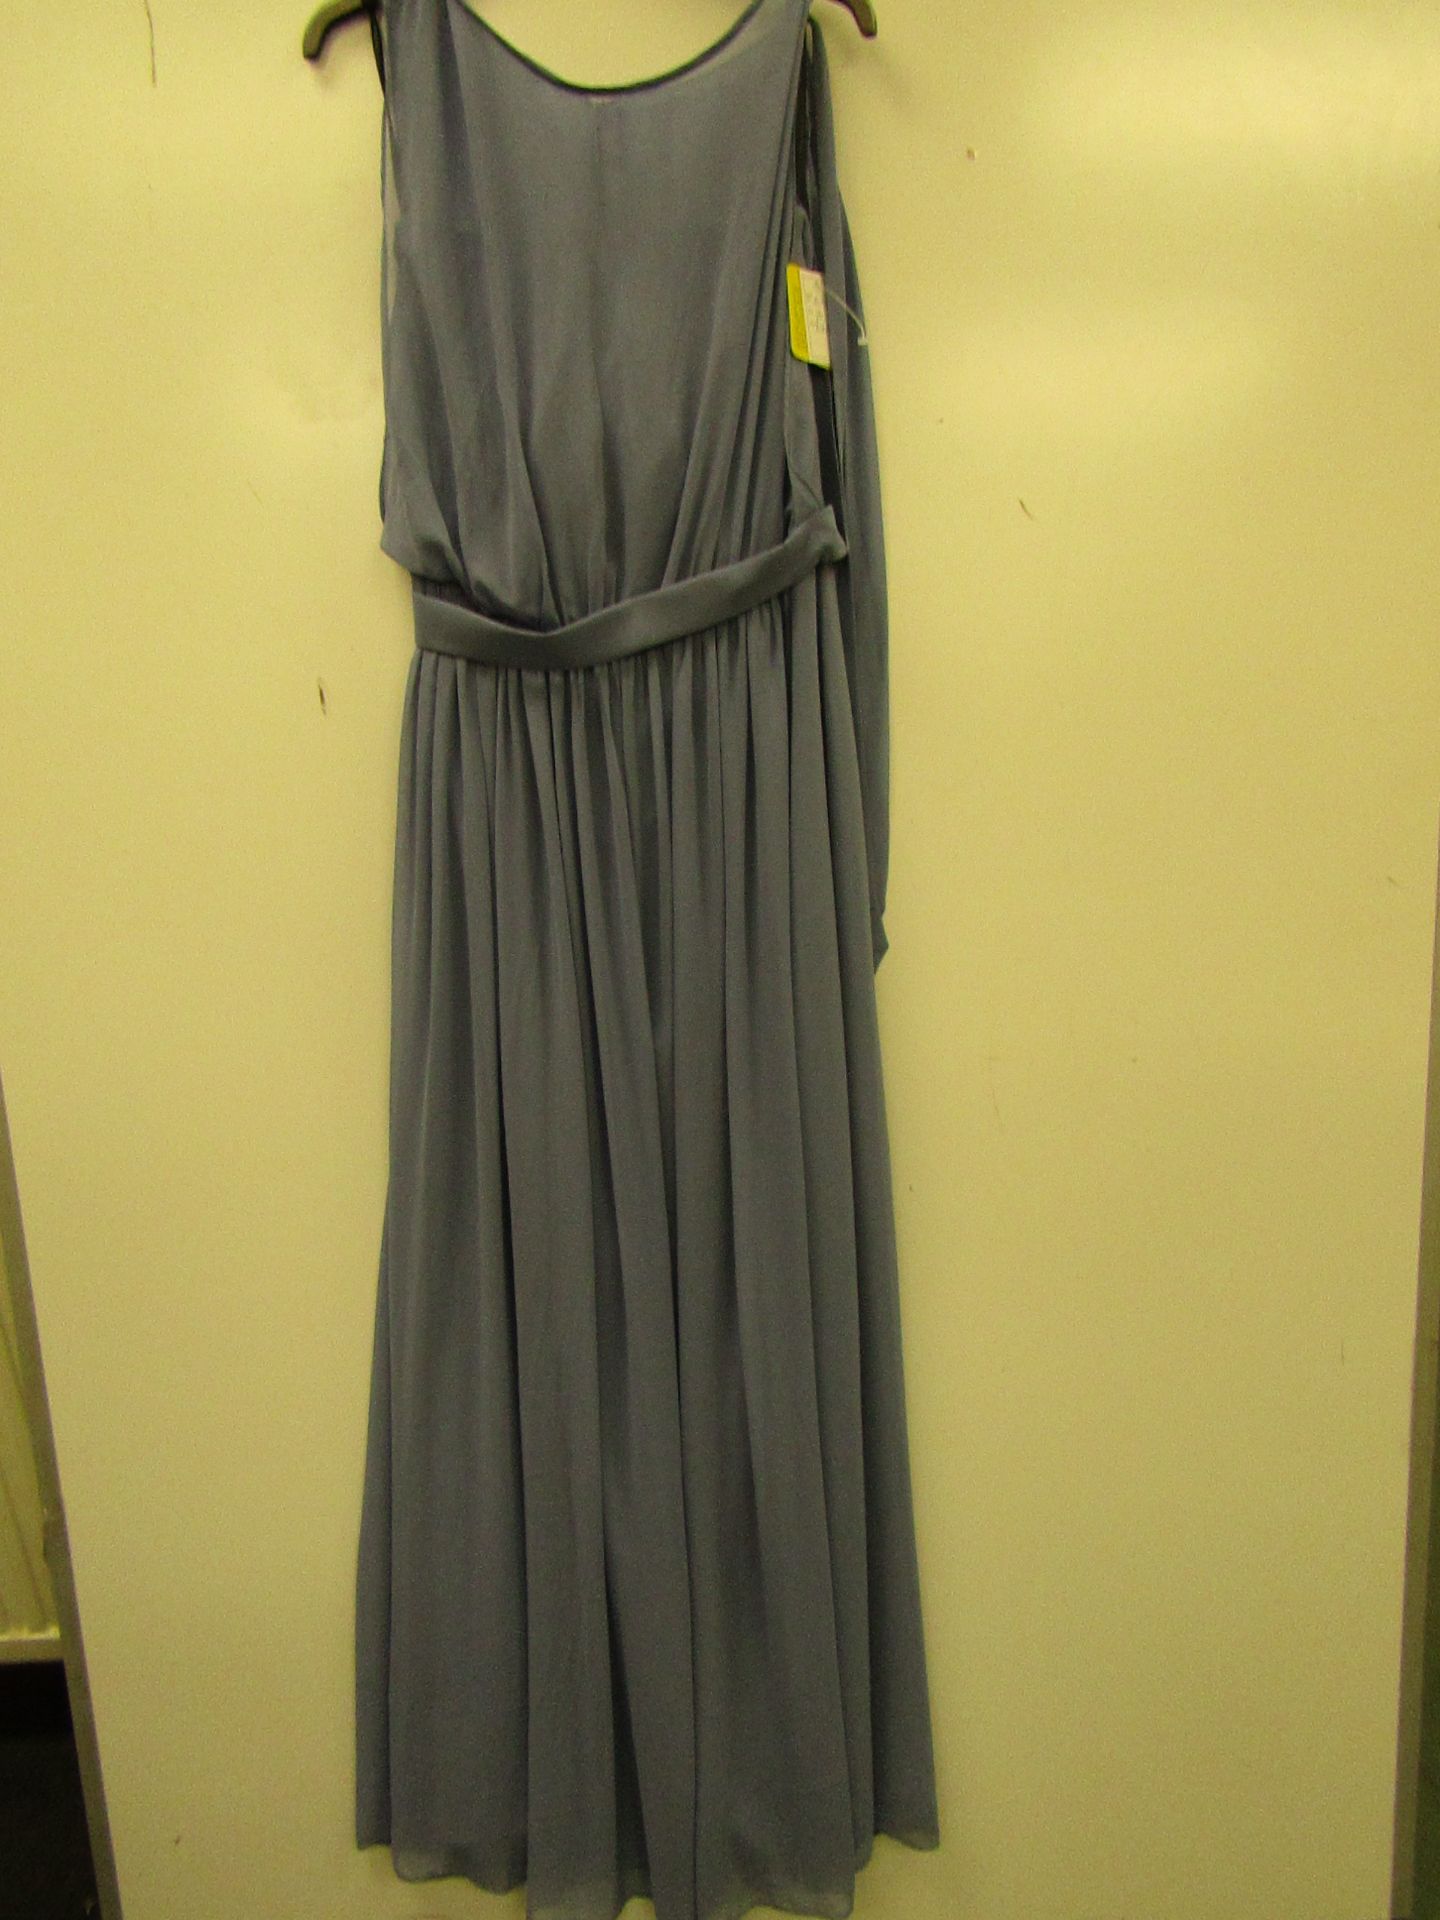 Social Prom/Bridesmaids grey coloured, size 12 RRP £200.